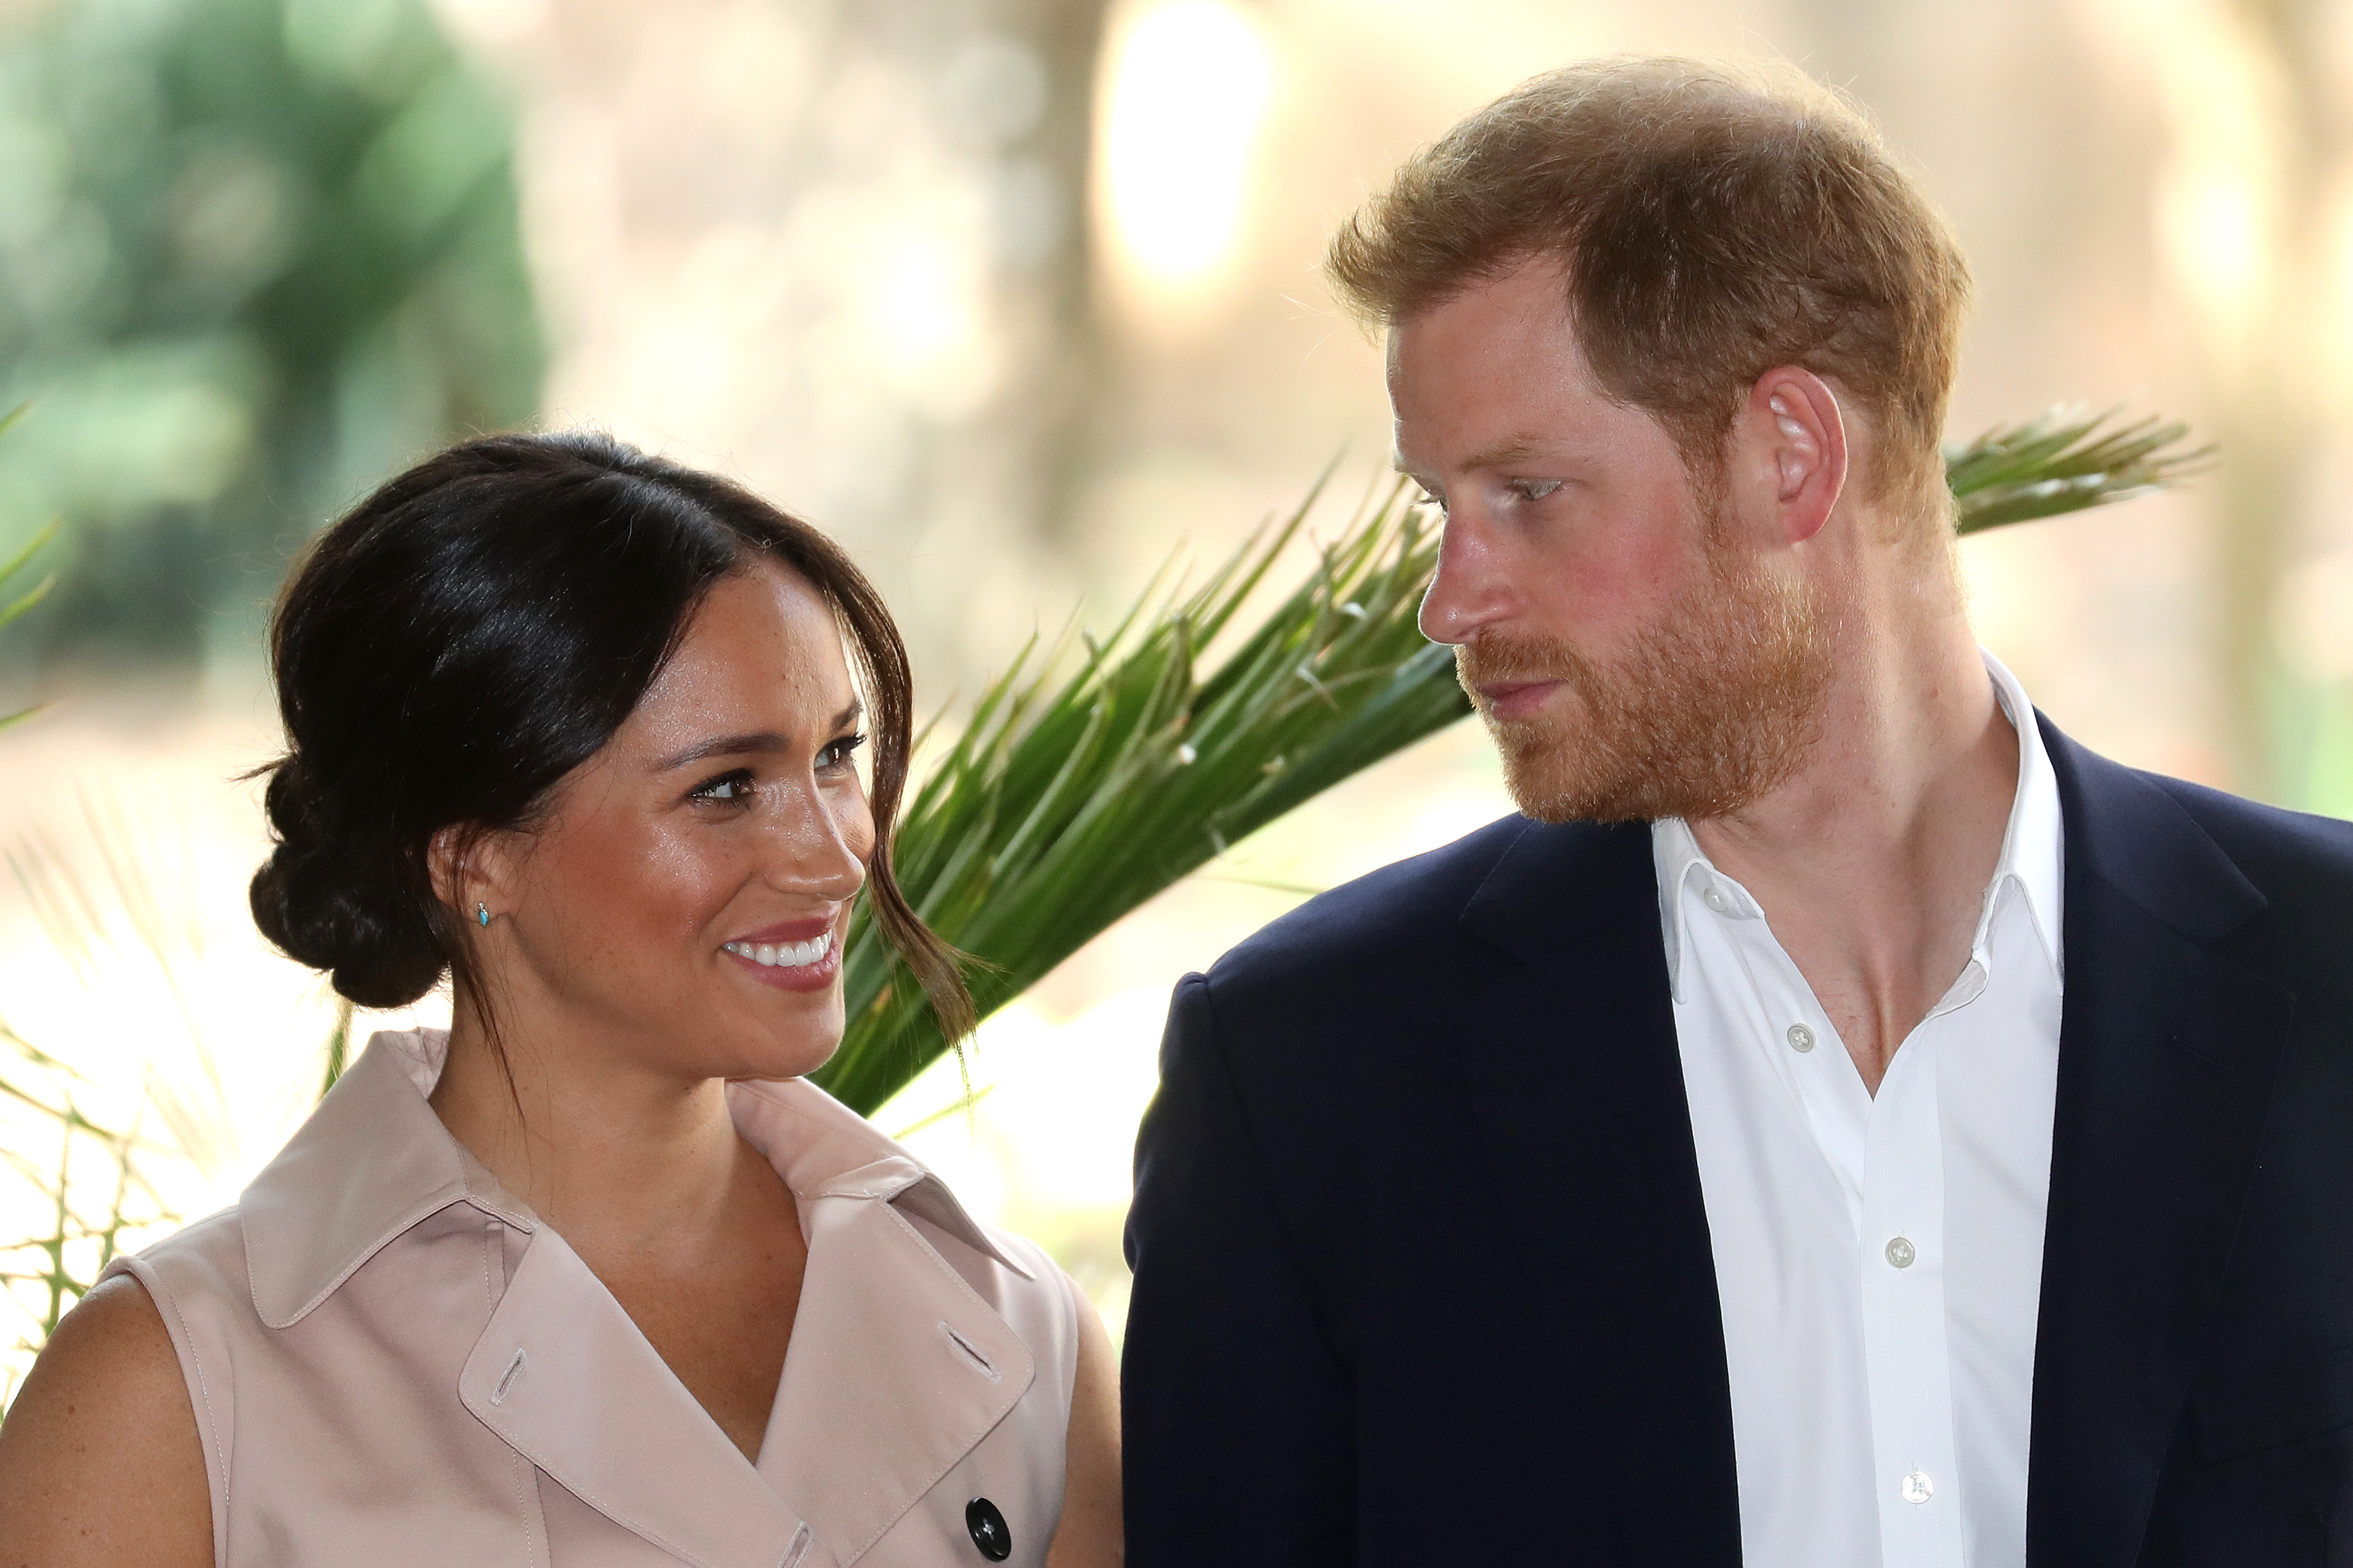 Prince Harry, Duke of Sussex and Meghan, Duchess of Sussex attend a Creative Industries and Business Reception in Johannesburg, South Africa, on October 2, 2019. | Source: Getty Images